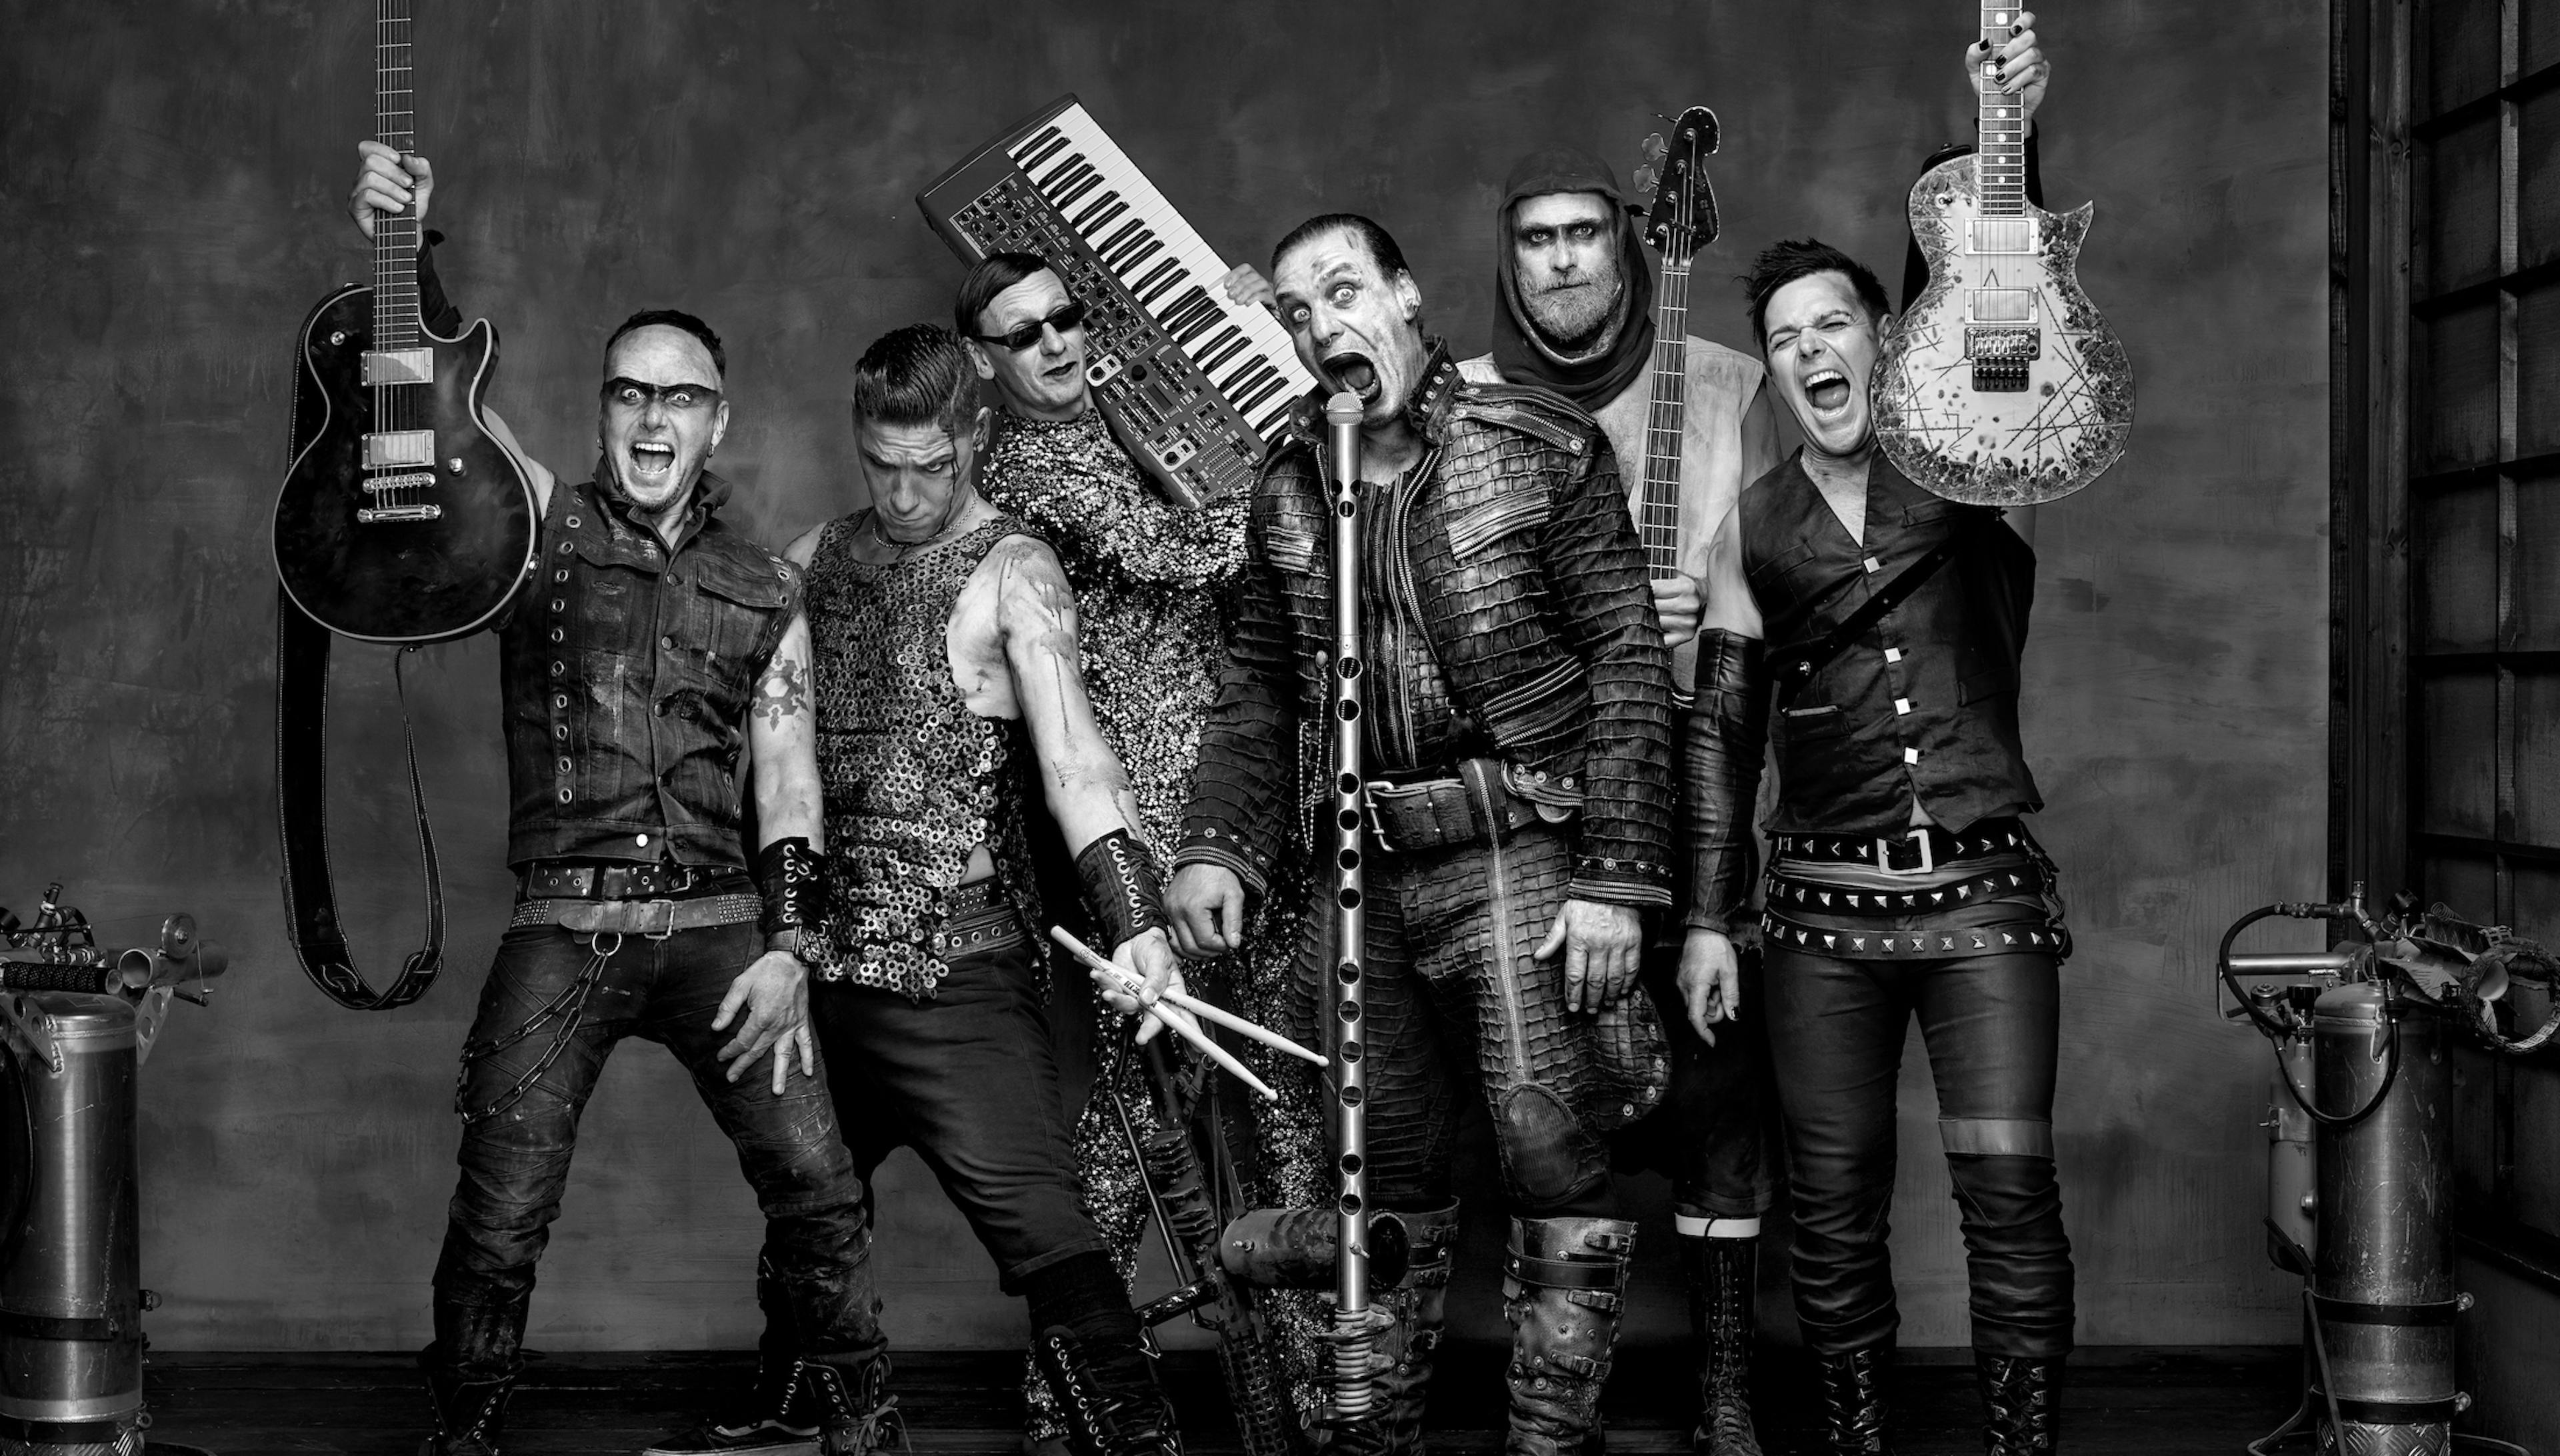 Rammstein Guitarists On New Album: "You Might Even Say It's Fun To Listen To"